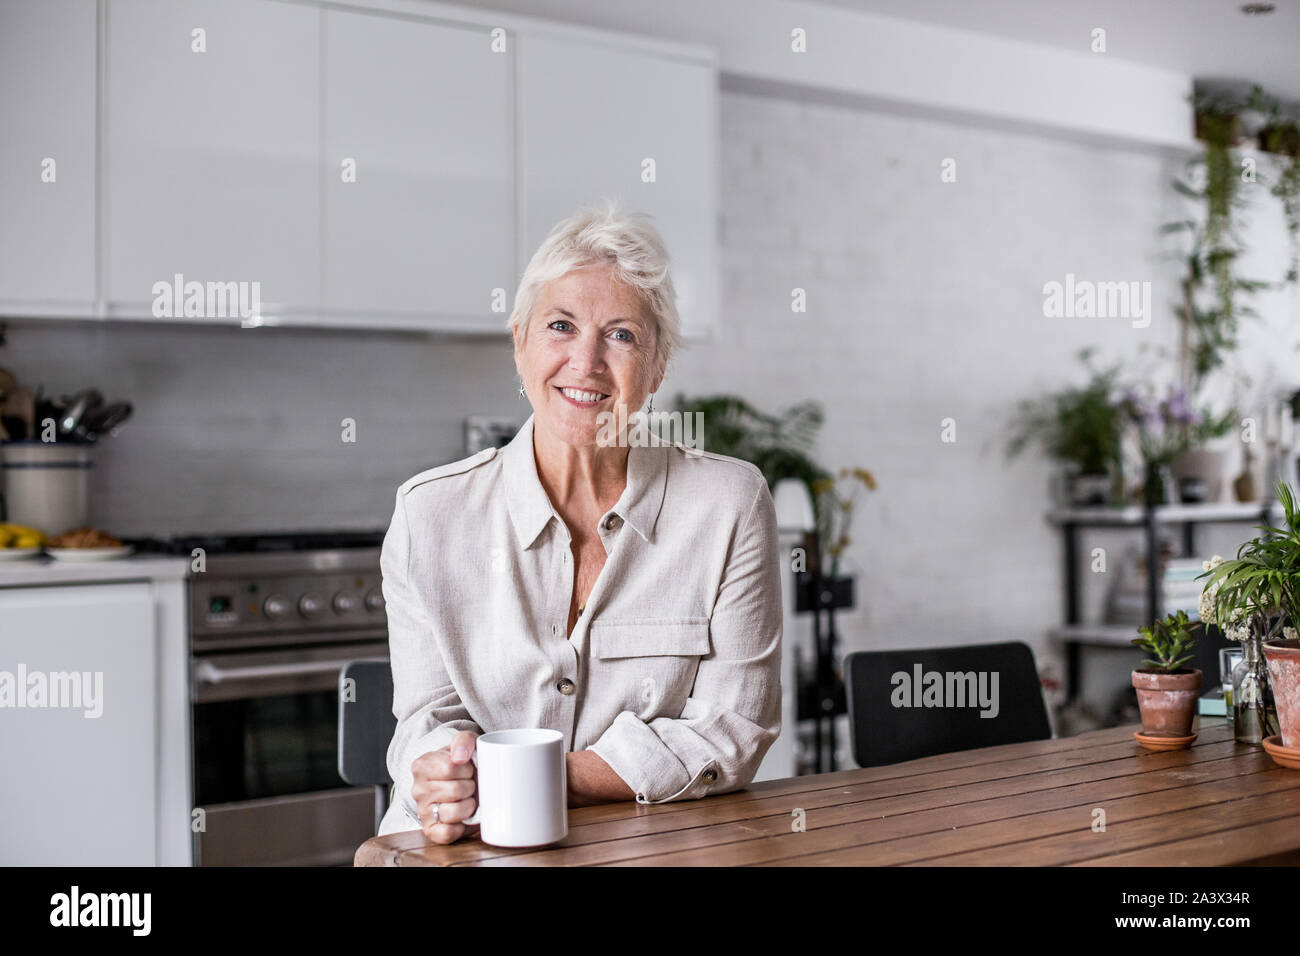 Portrait mature adult woman looking out of window with a mug of tea Stock Photo